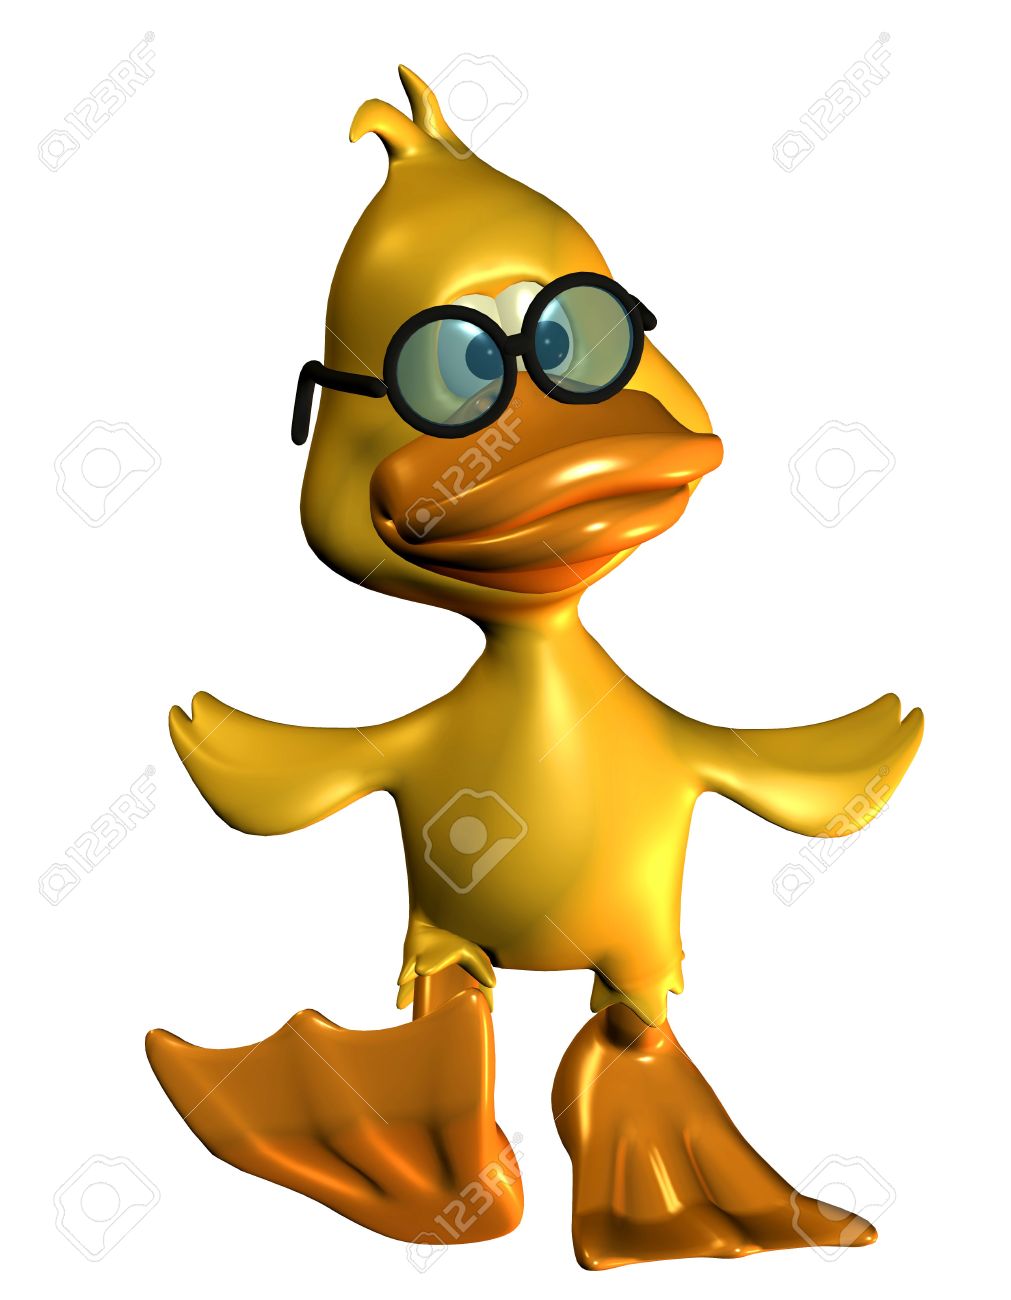 3D Rendering Of A Duck Waddling In Comic Style Stock Photo.